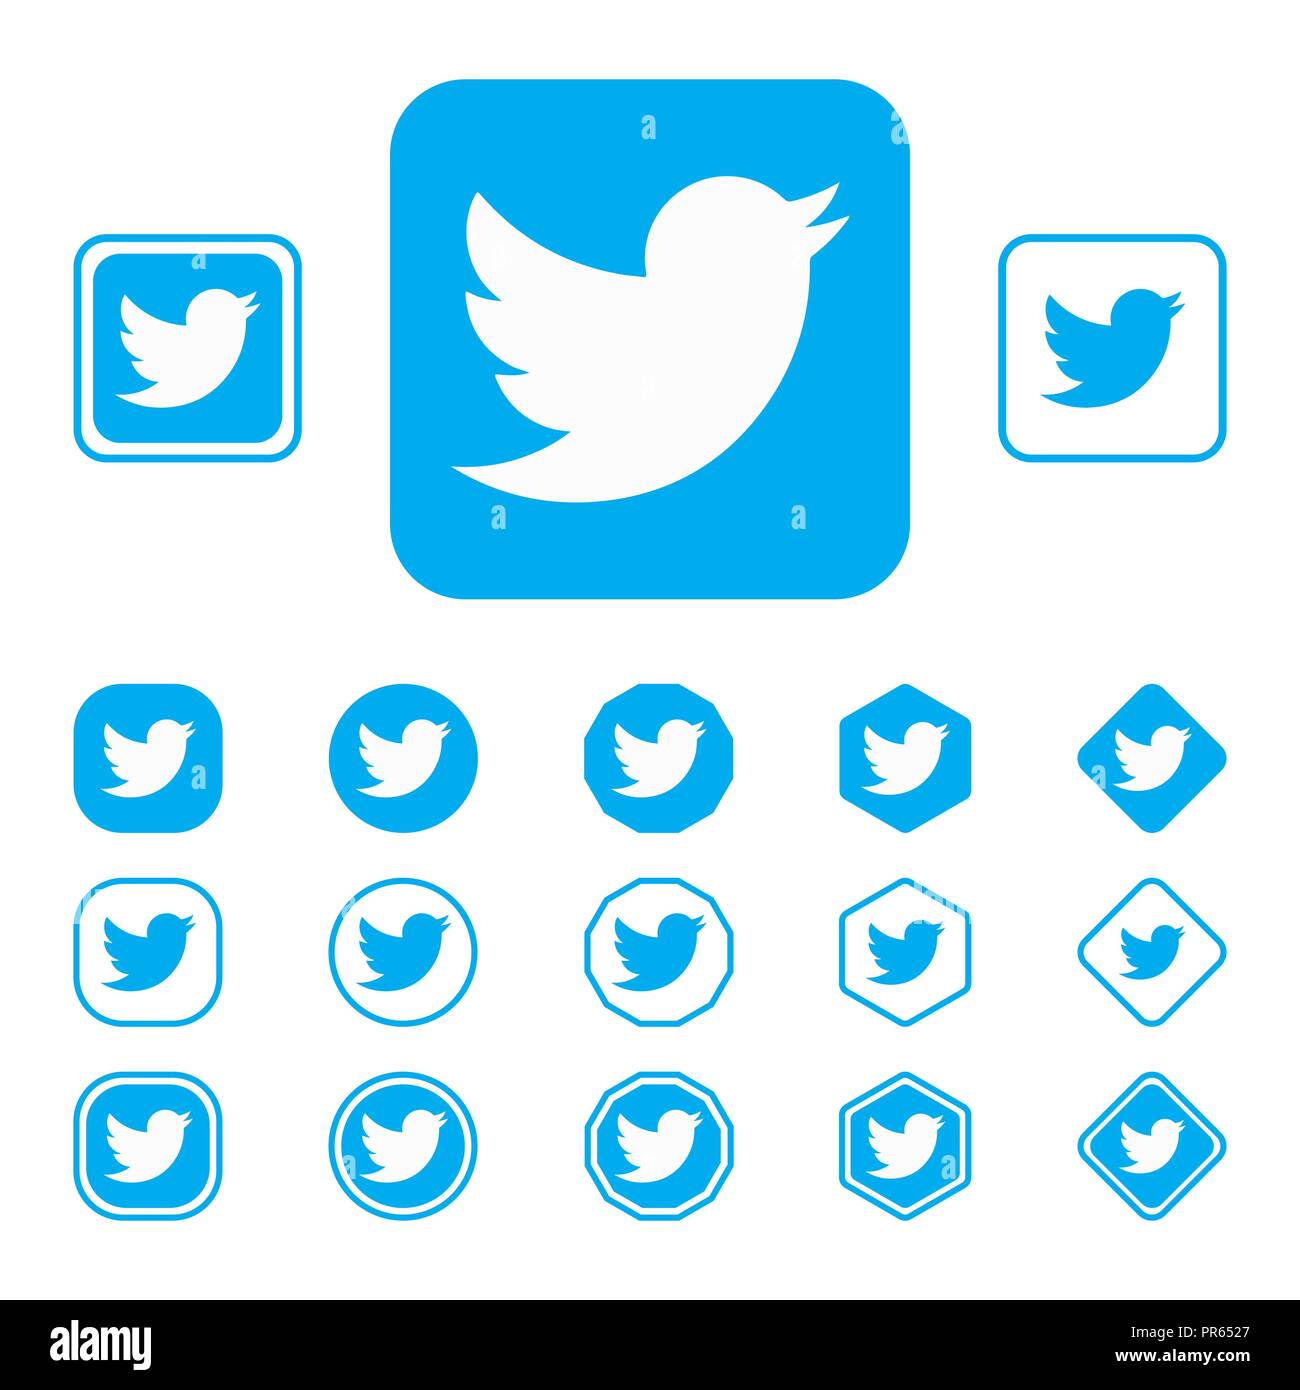 LISKI, RUSSIA - SEPTEMBER 29, 2018 Logo of the well-known social network Twitter. Concept. Flat icon set on a white background isolated vector illustr Stock Vector